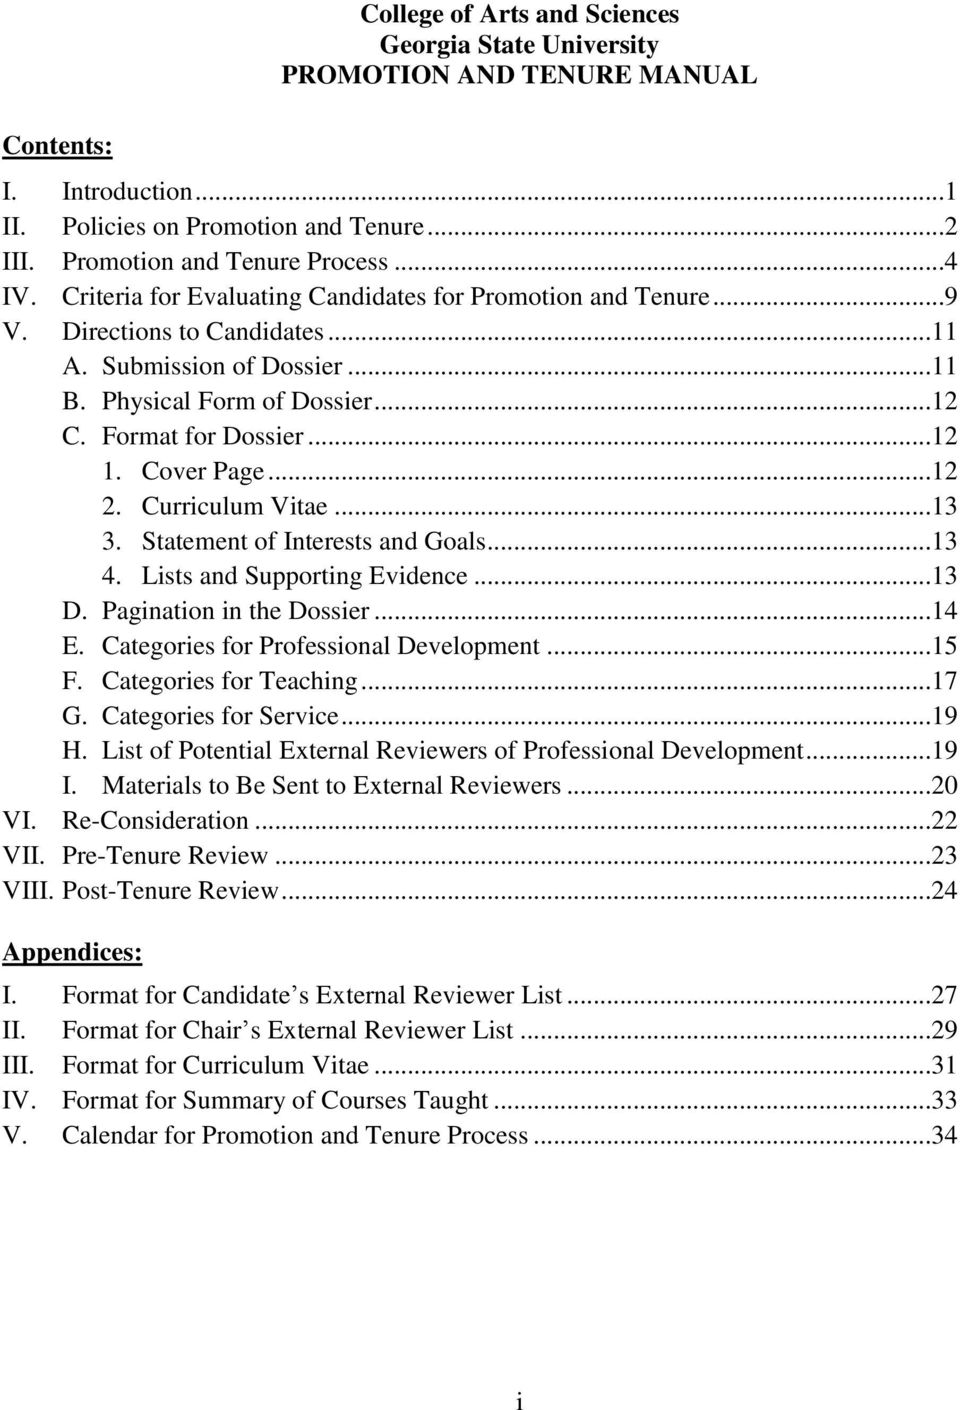 Cover Page...12 2. Curriculum Vitae...13 3. Statement of Interests and Goals...13 4. Lists and Supporting Evidence...13 D. Pagination in the Dossier...14 E. Categories for Professional Development.